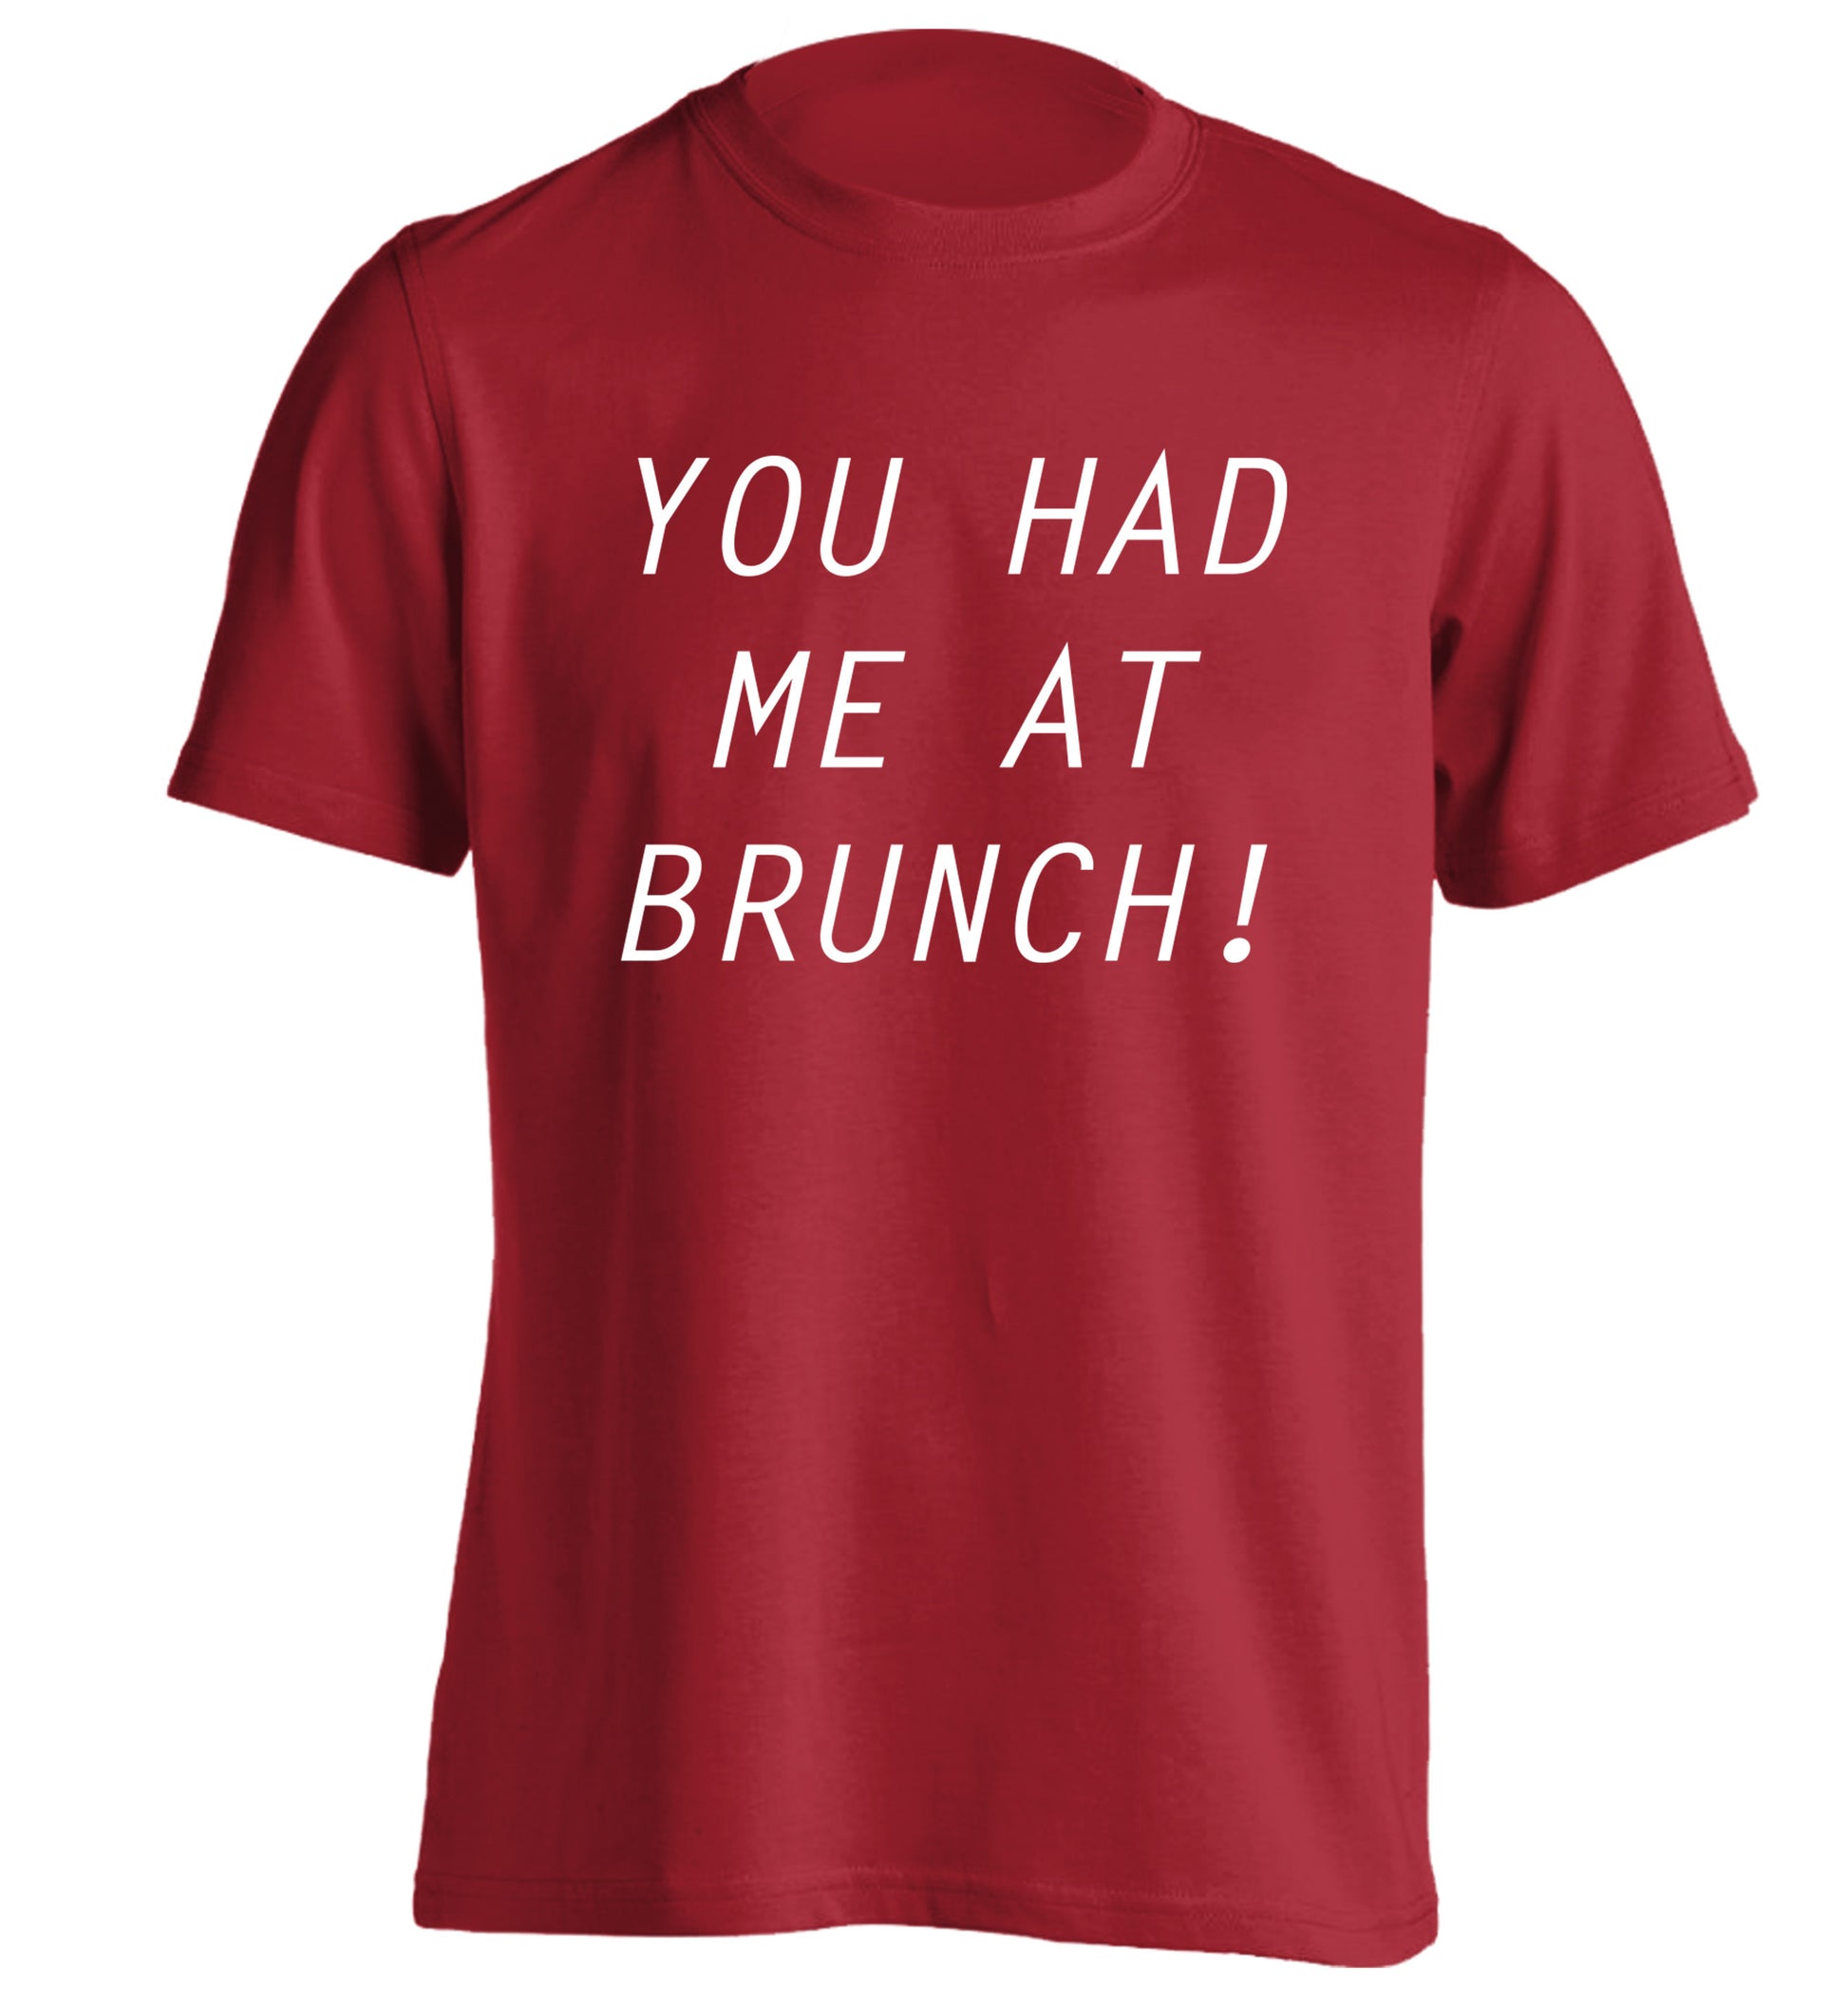 You had me at brunch adults unisex red Tshirt 2XL